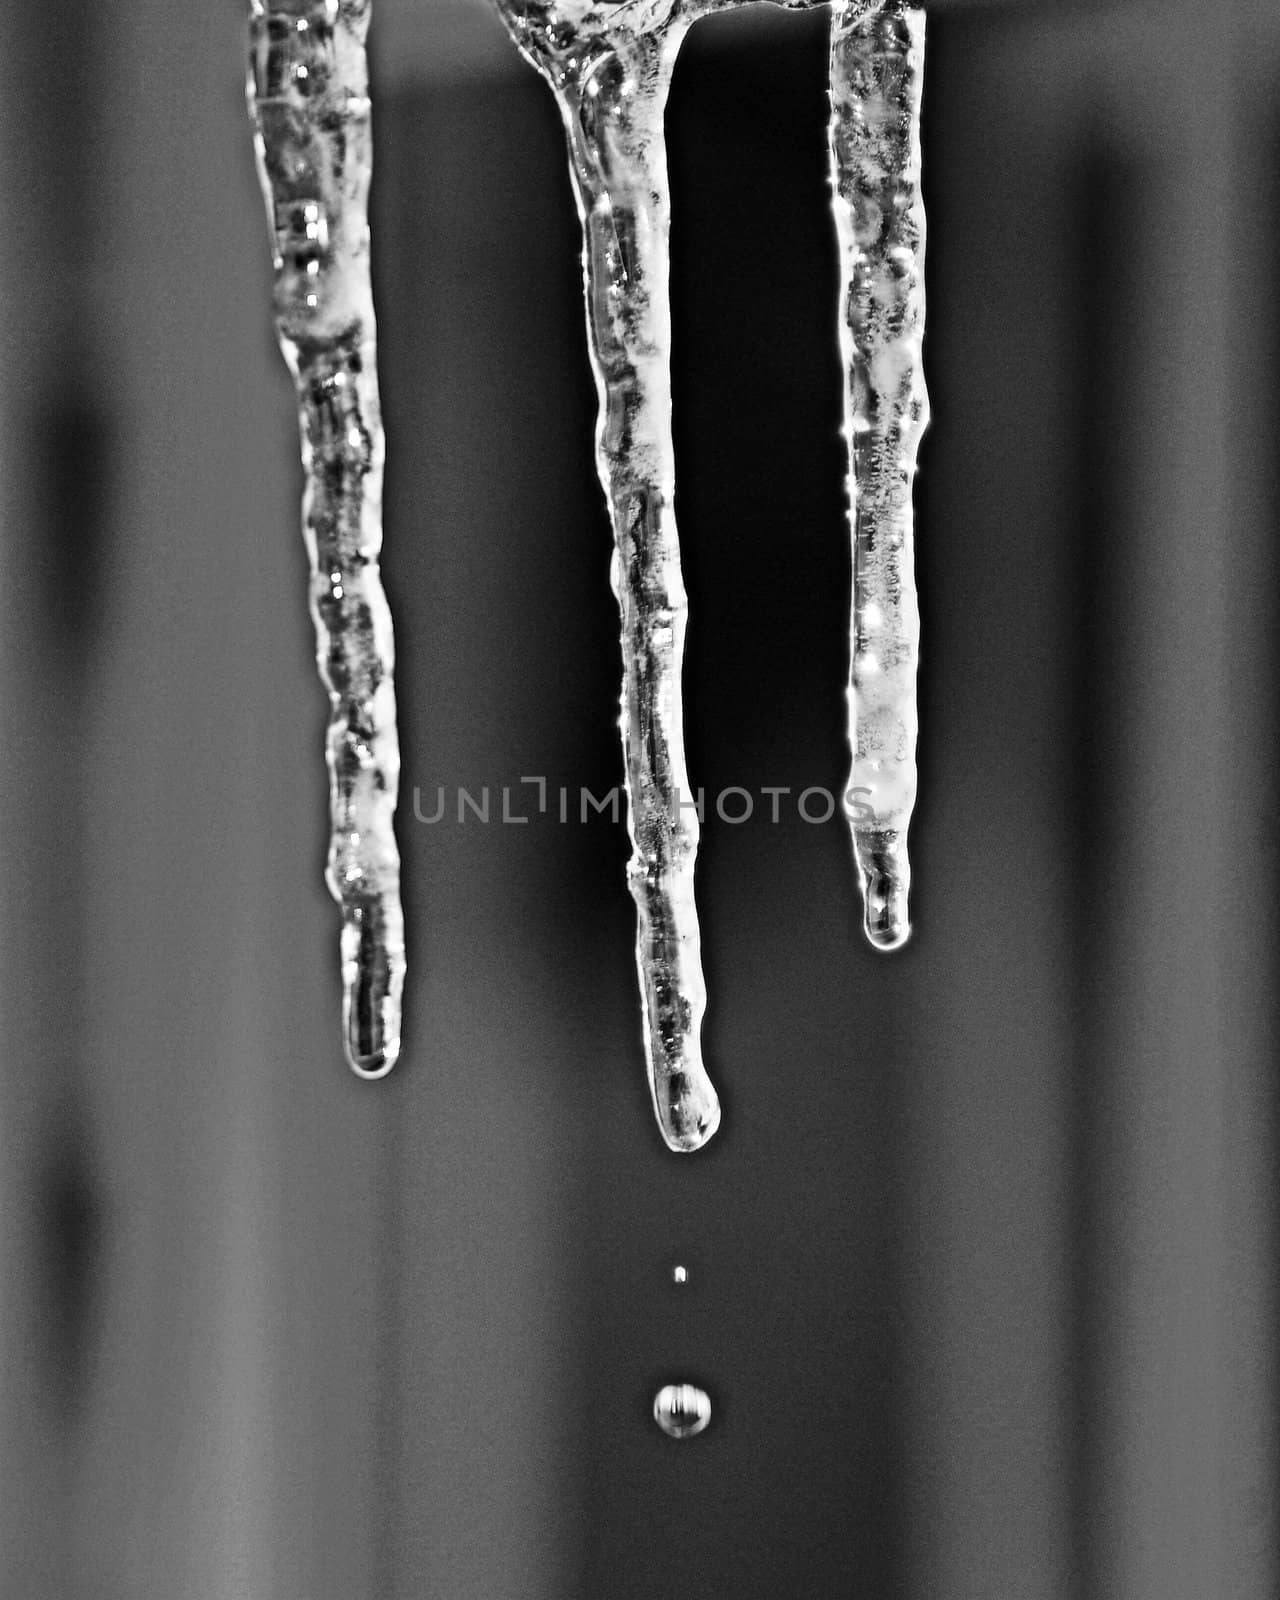 Ice droplet by sfisher16